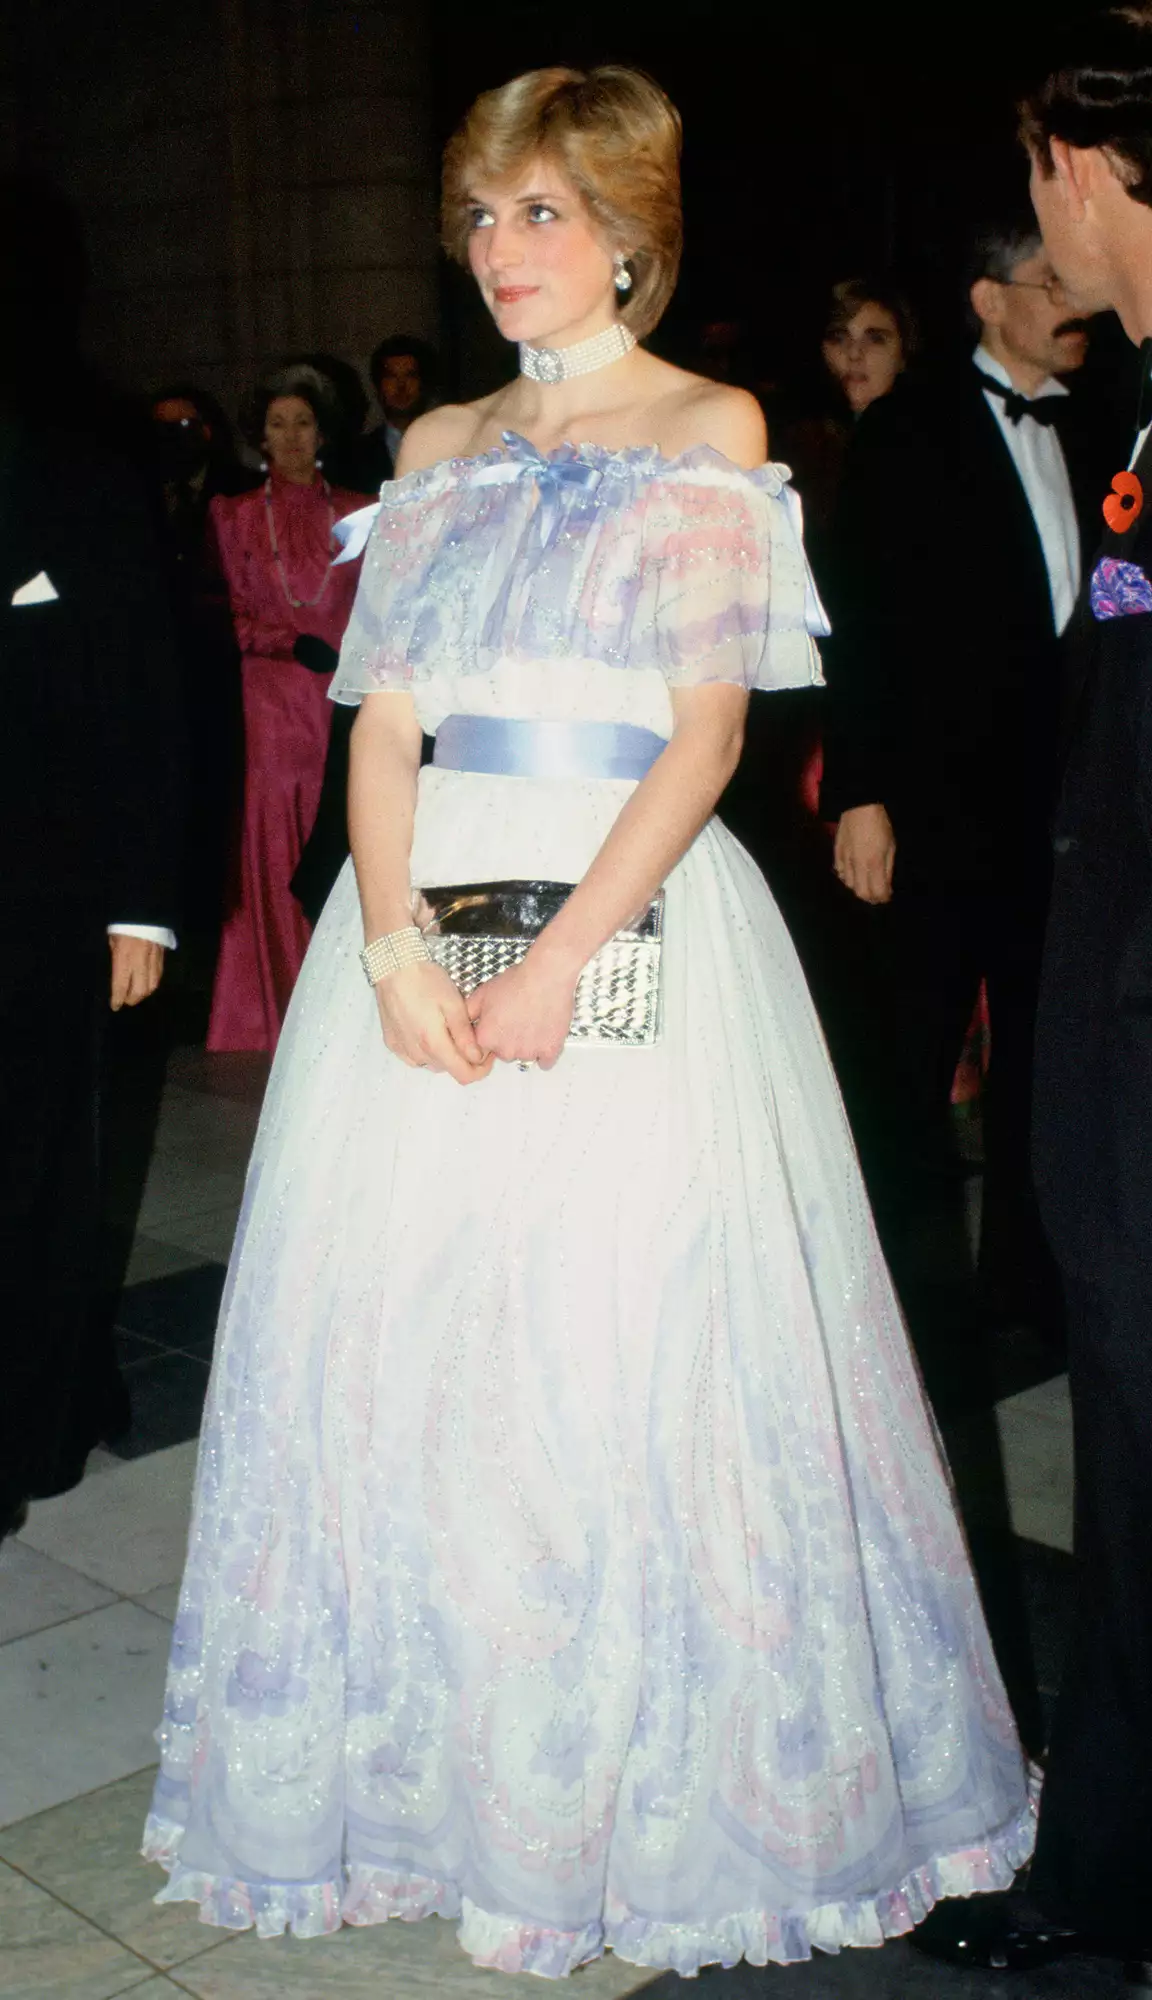 Diana Princess of Wales at 'Splendours of the Gonzaga' exhibition at the Victoria and Albert Museum wearing a dress designed by Bellville Sassoon